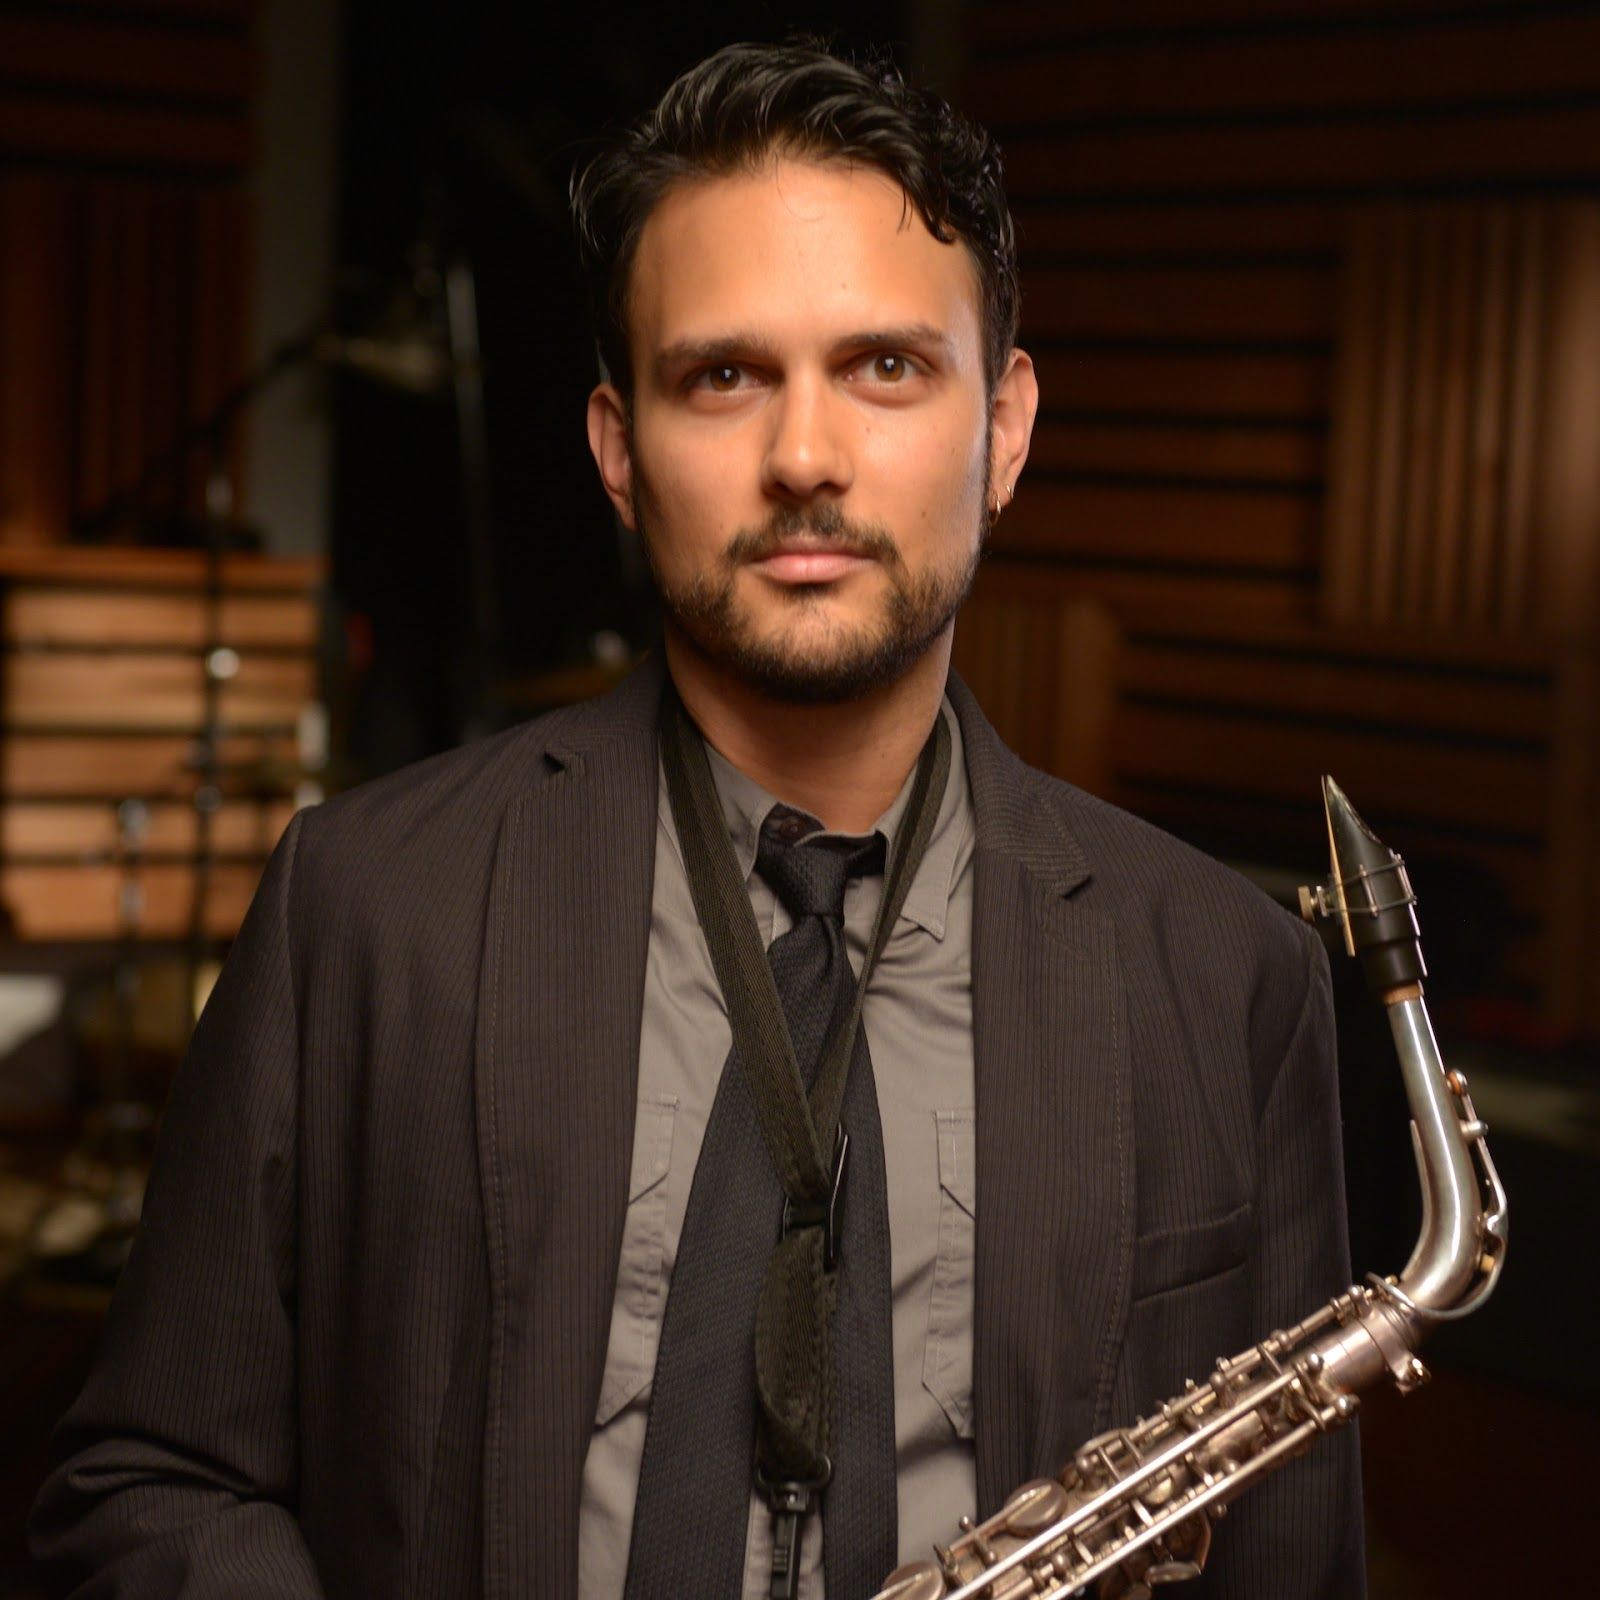 Aakash Mittal with Saxophone